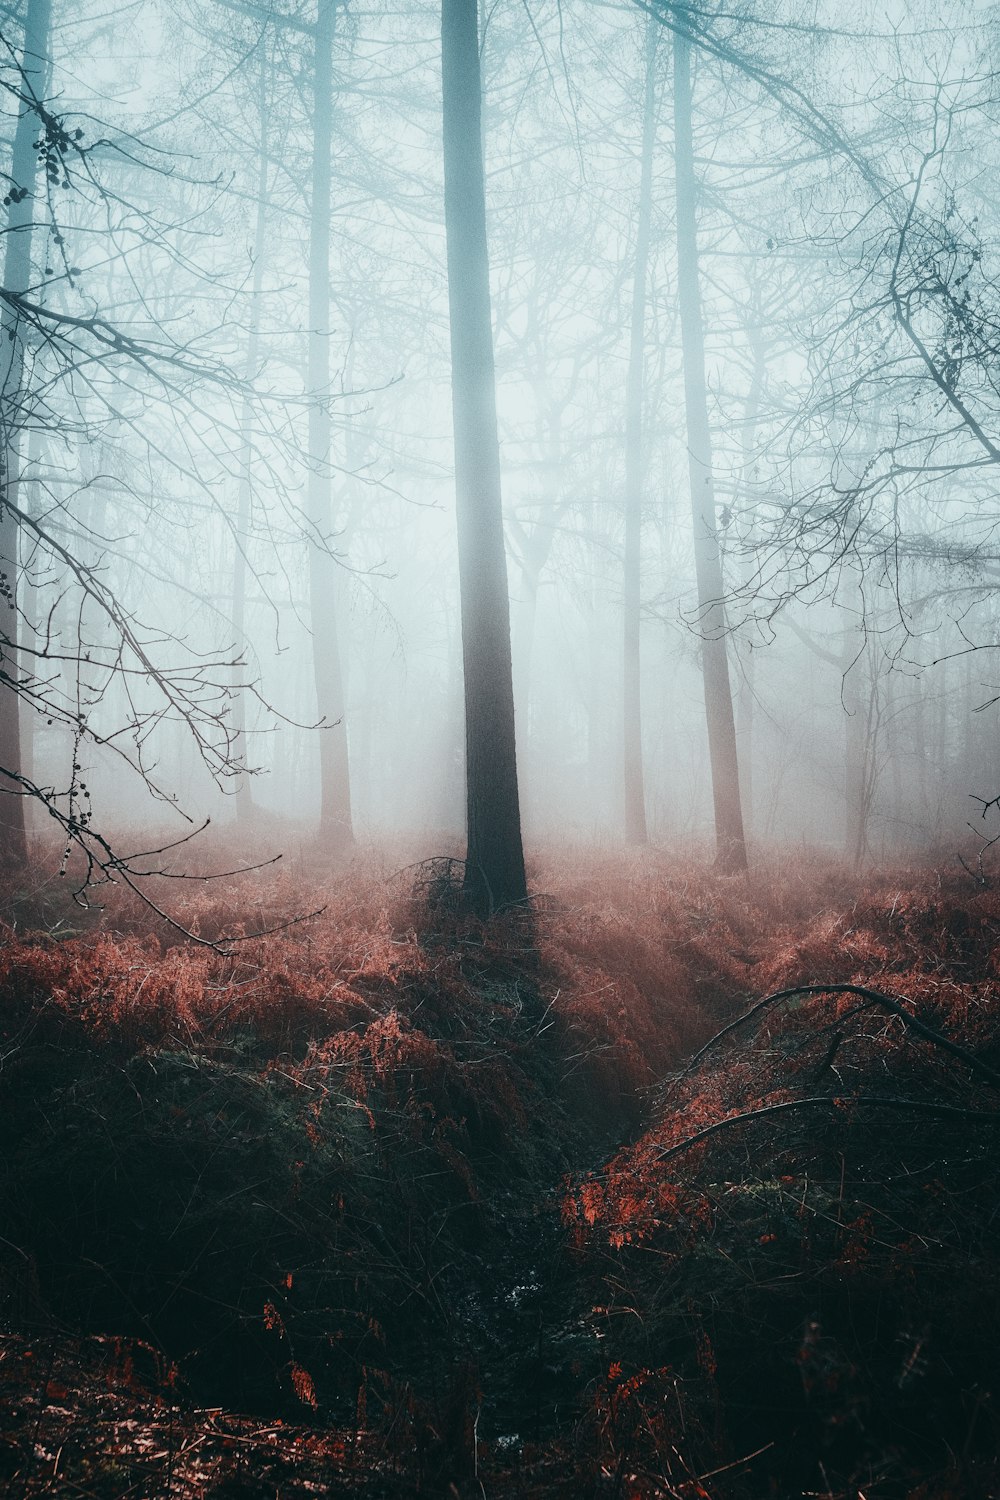 a forest filled with lots of tall trees covered in fog